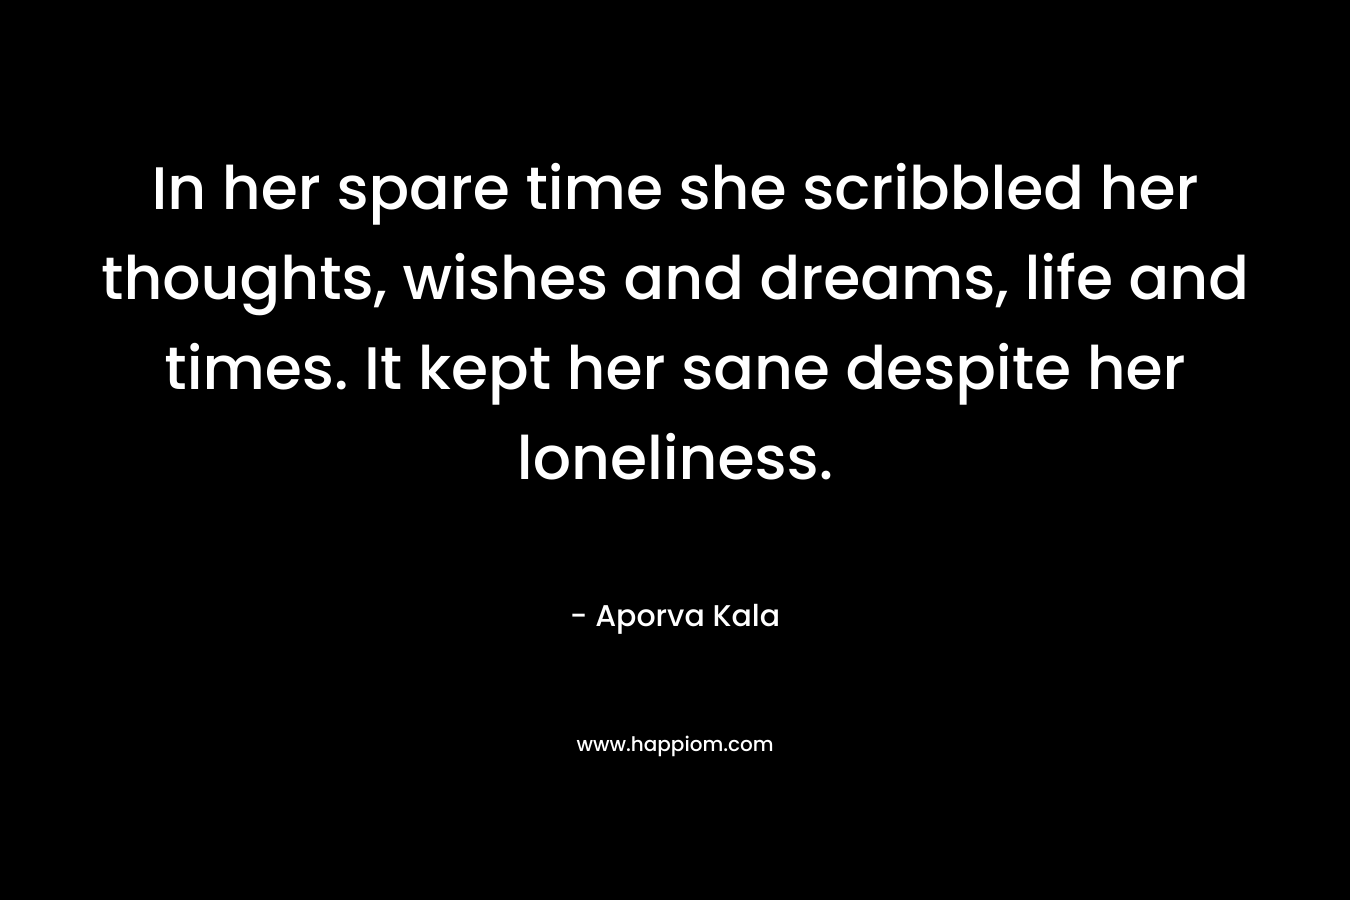 In her spare time she scribbled her thoughts, wishes and dreams, life and times. It kept her sane despite her loneliness.